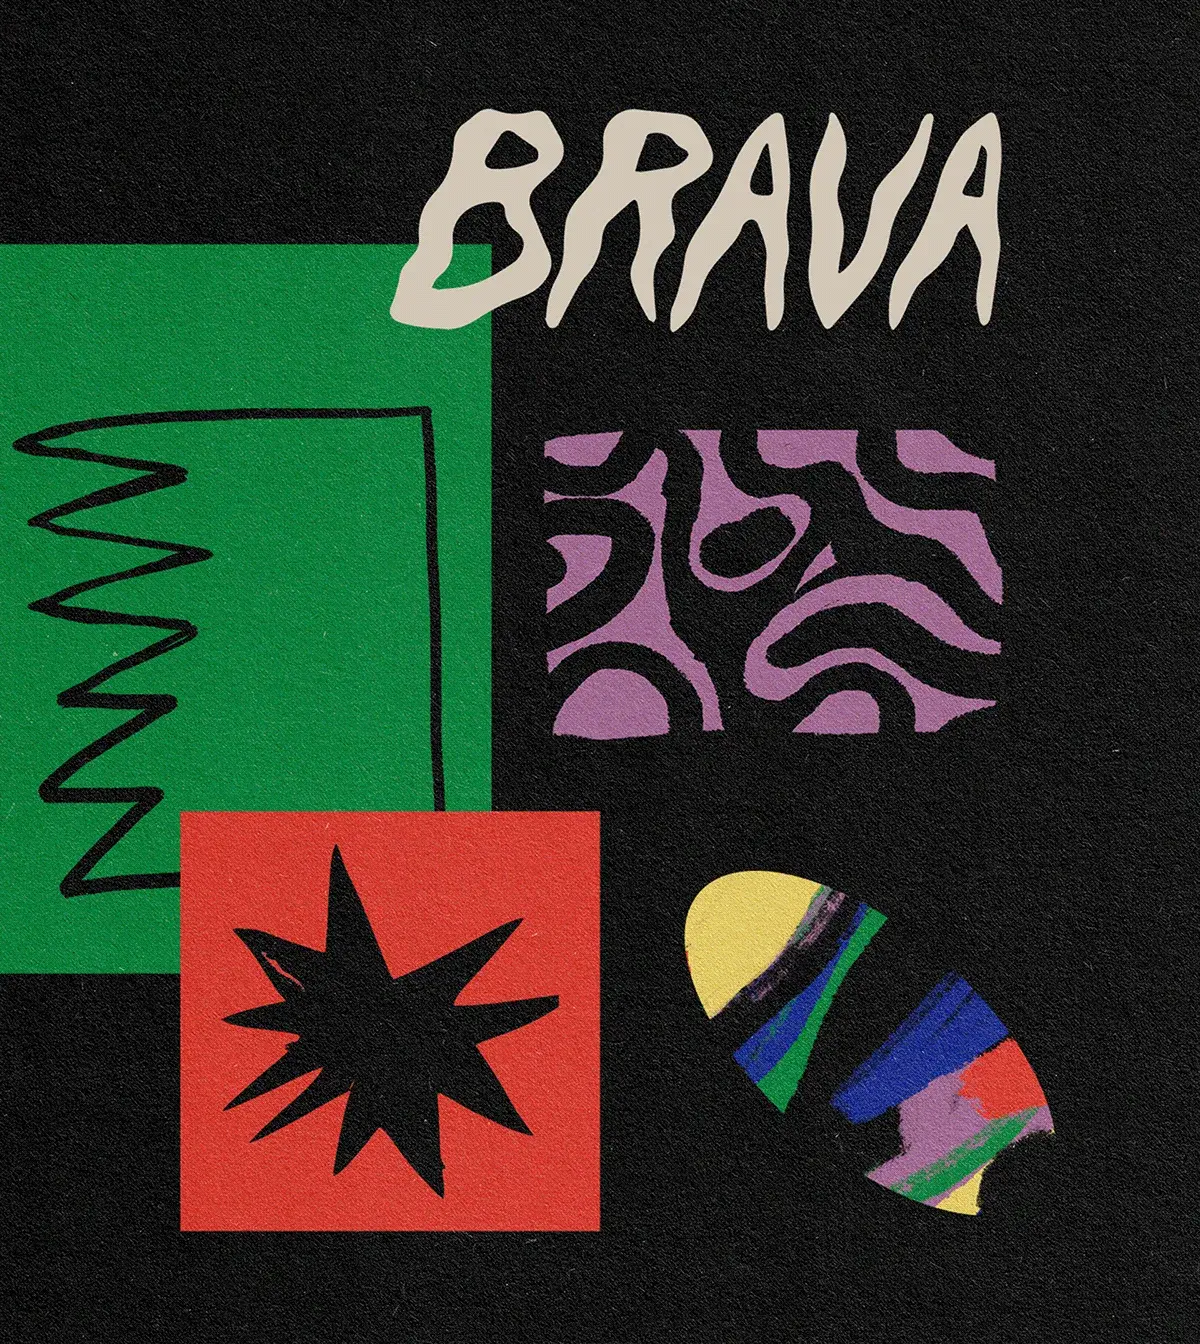 Visual Identity for Brava, platform to amplify voices, a safe and welcoming place.